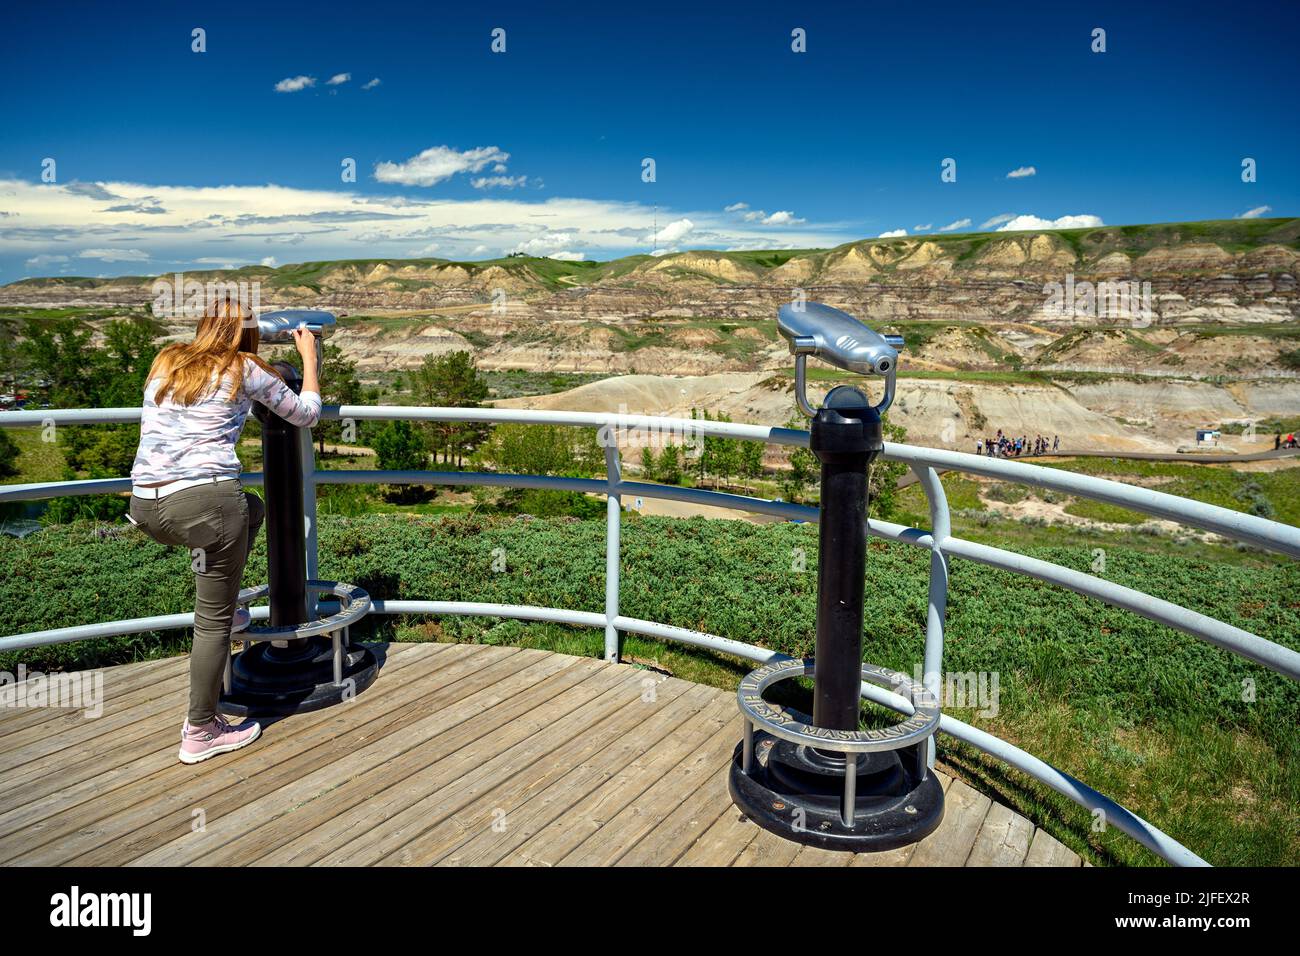 Tourists observing the landscape of the Canadian Badlands via binocular in Drumheller, the dinosaur capital of the world, Alberta, Canada Stock Photo